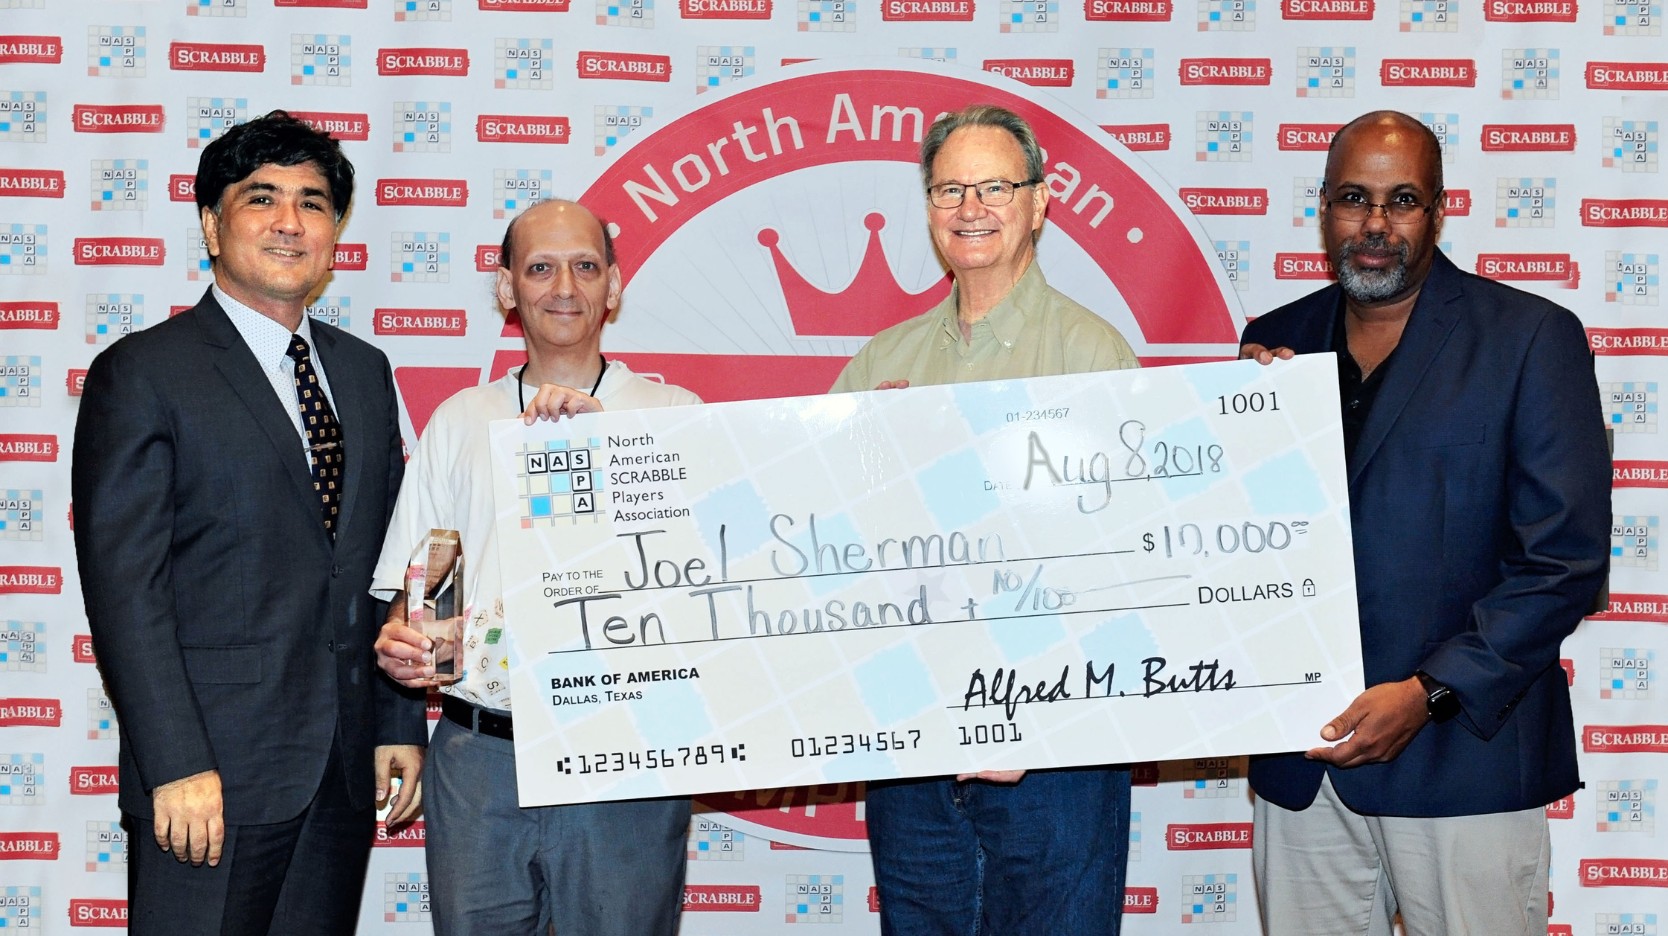 Joel Sherman - Winner of 2018 North American Scrabble Championship with prize check